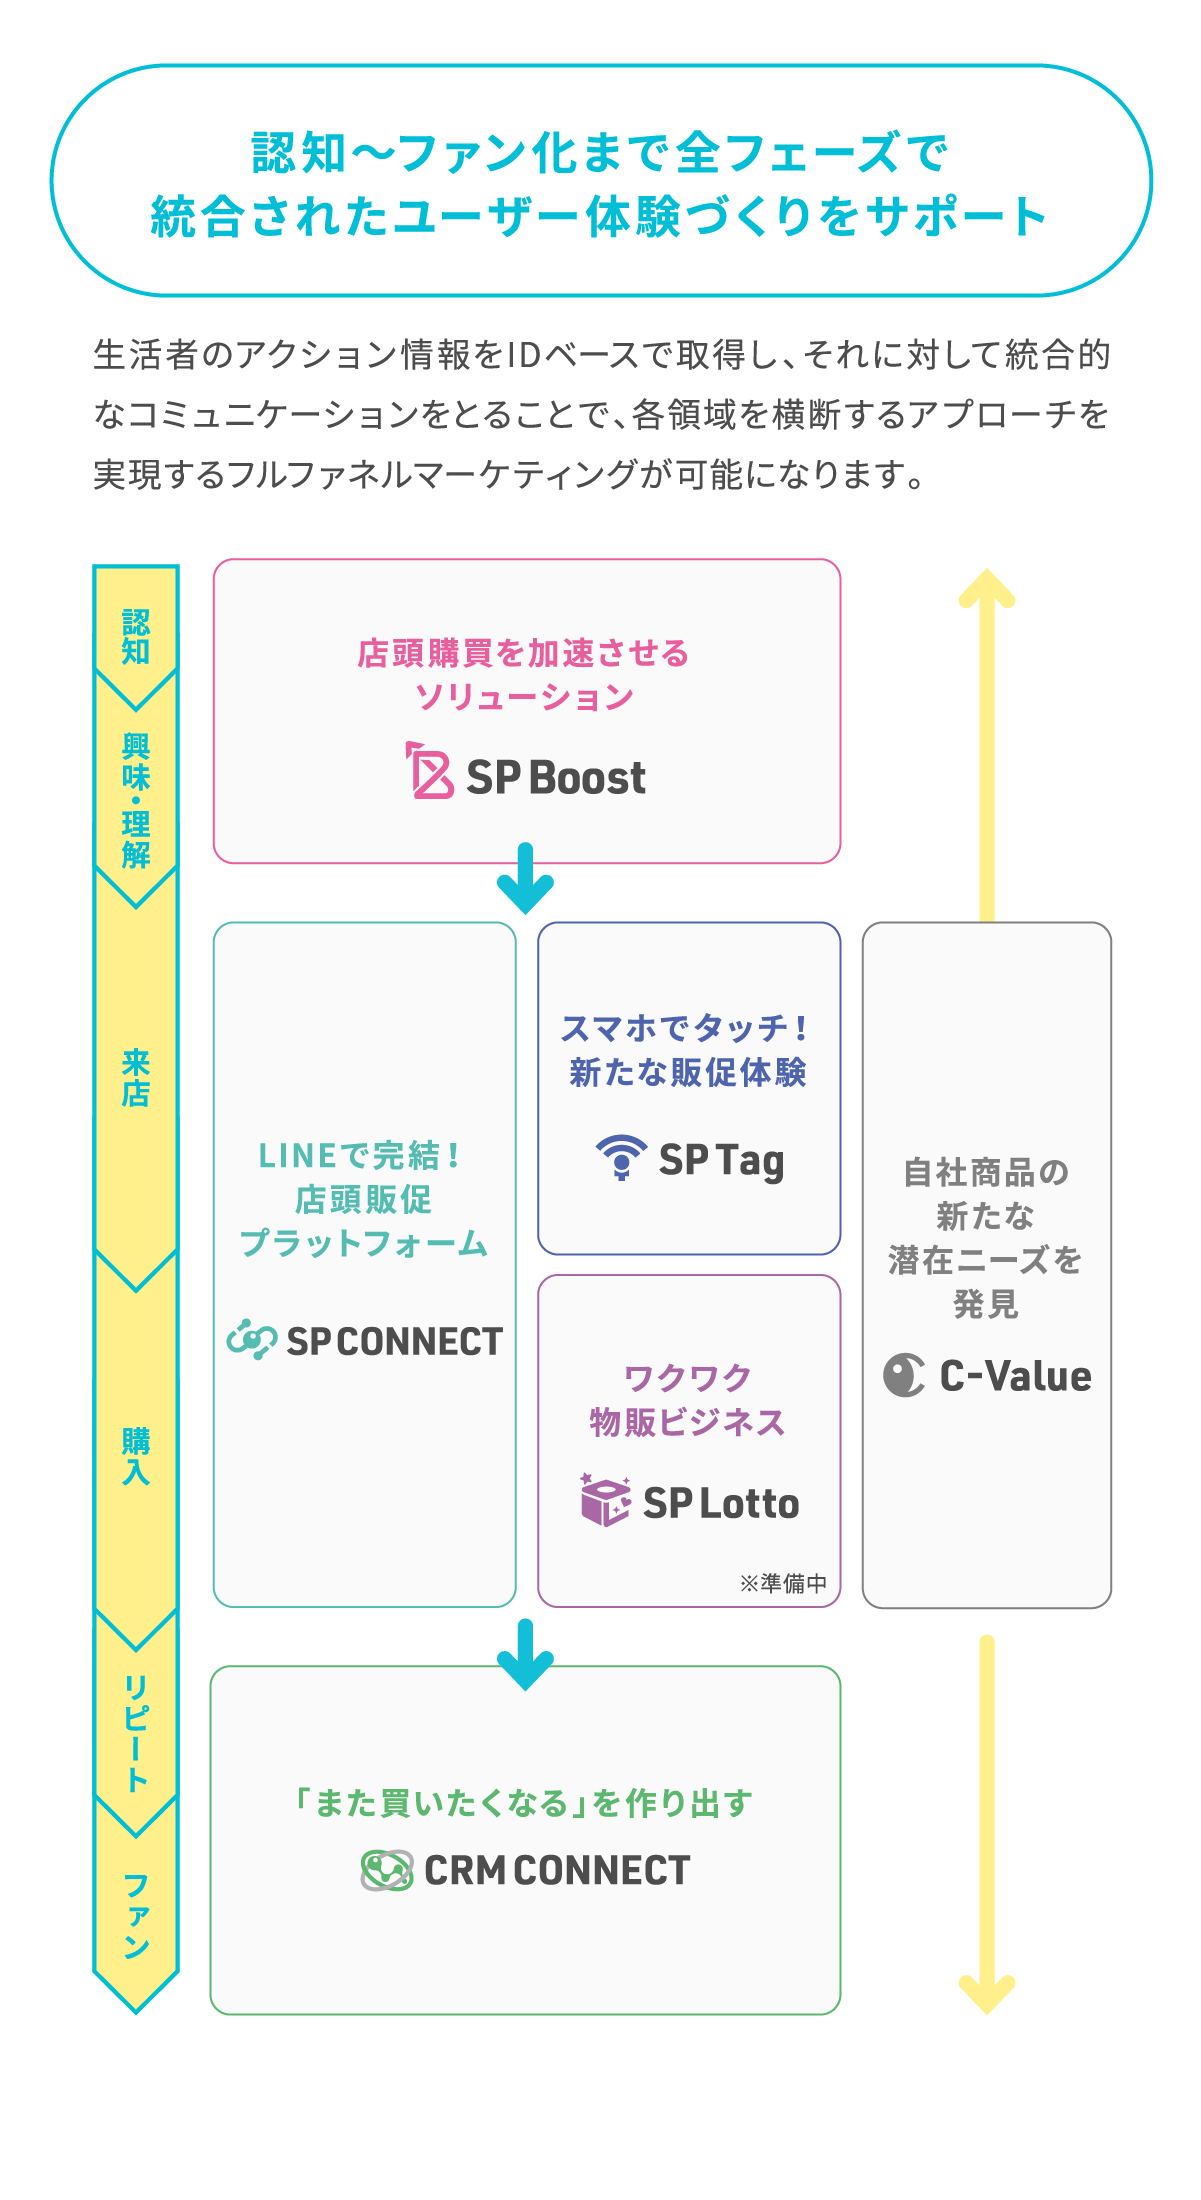 SP CONNECTとは